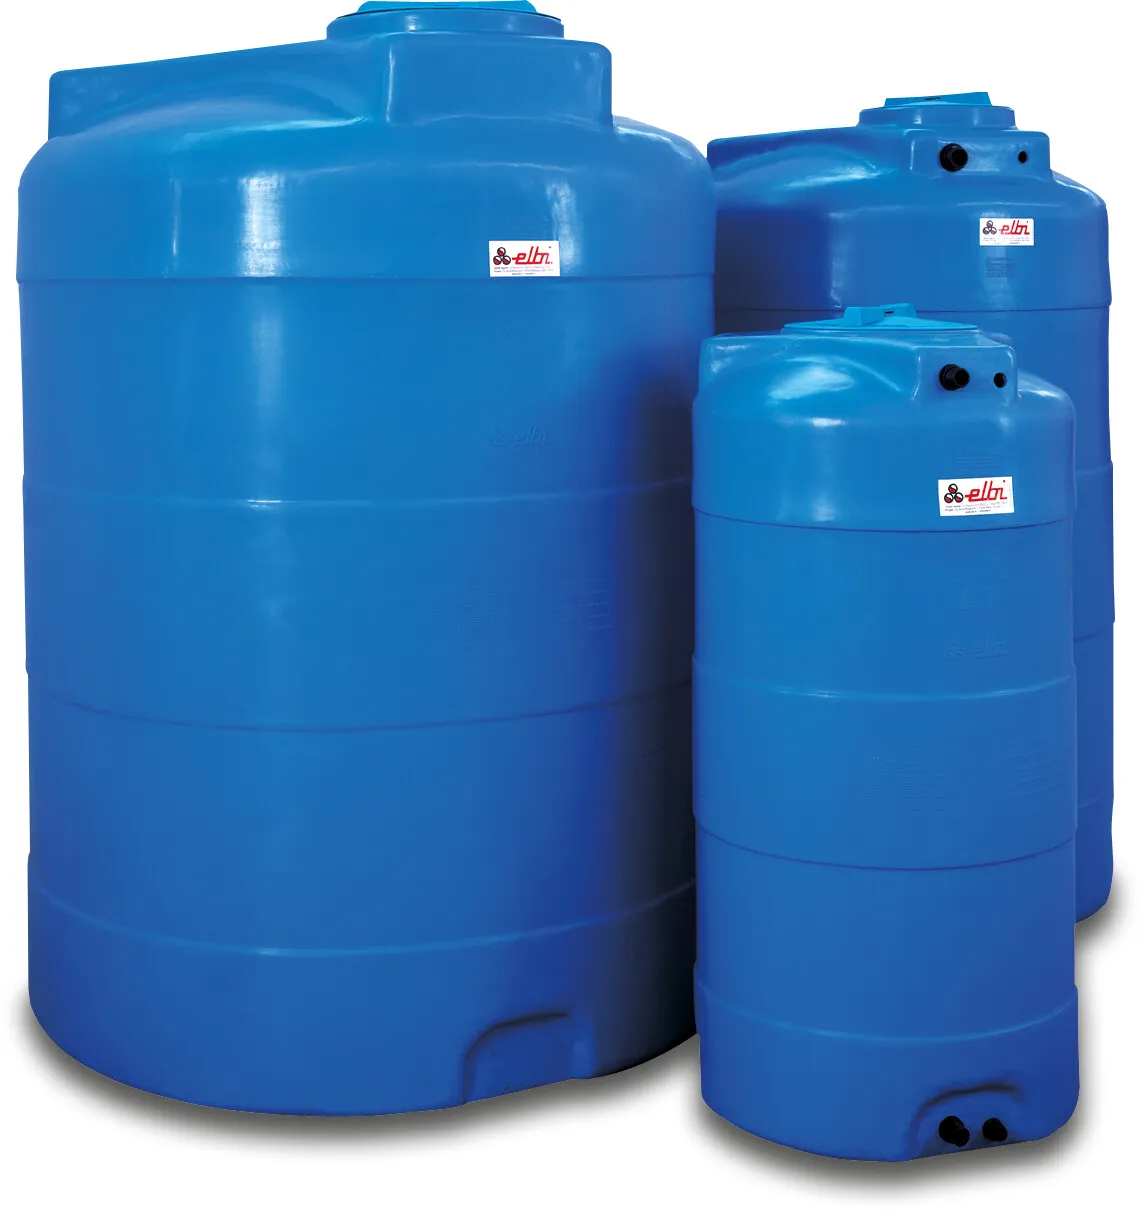 Elbi Tank LDPE blue 500ltr type CV vertical without connections